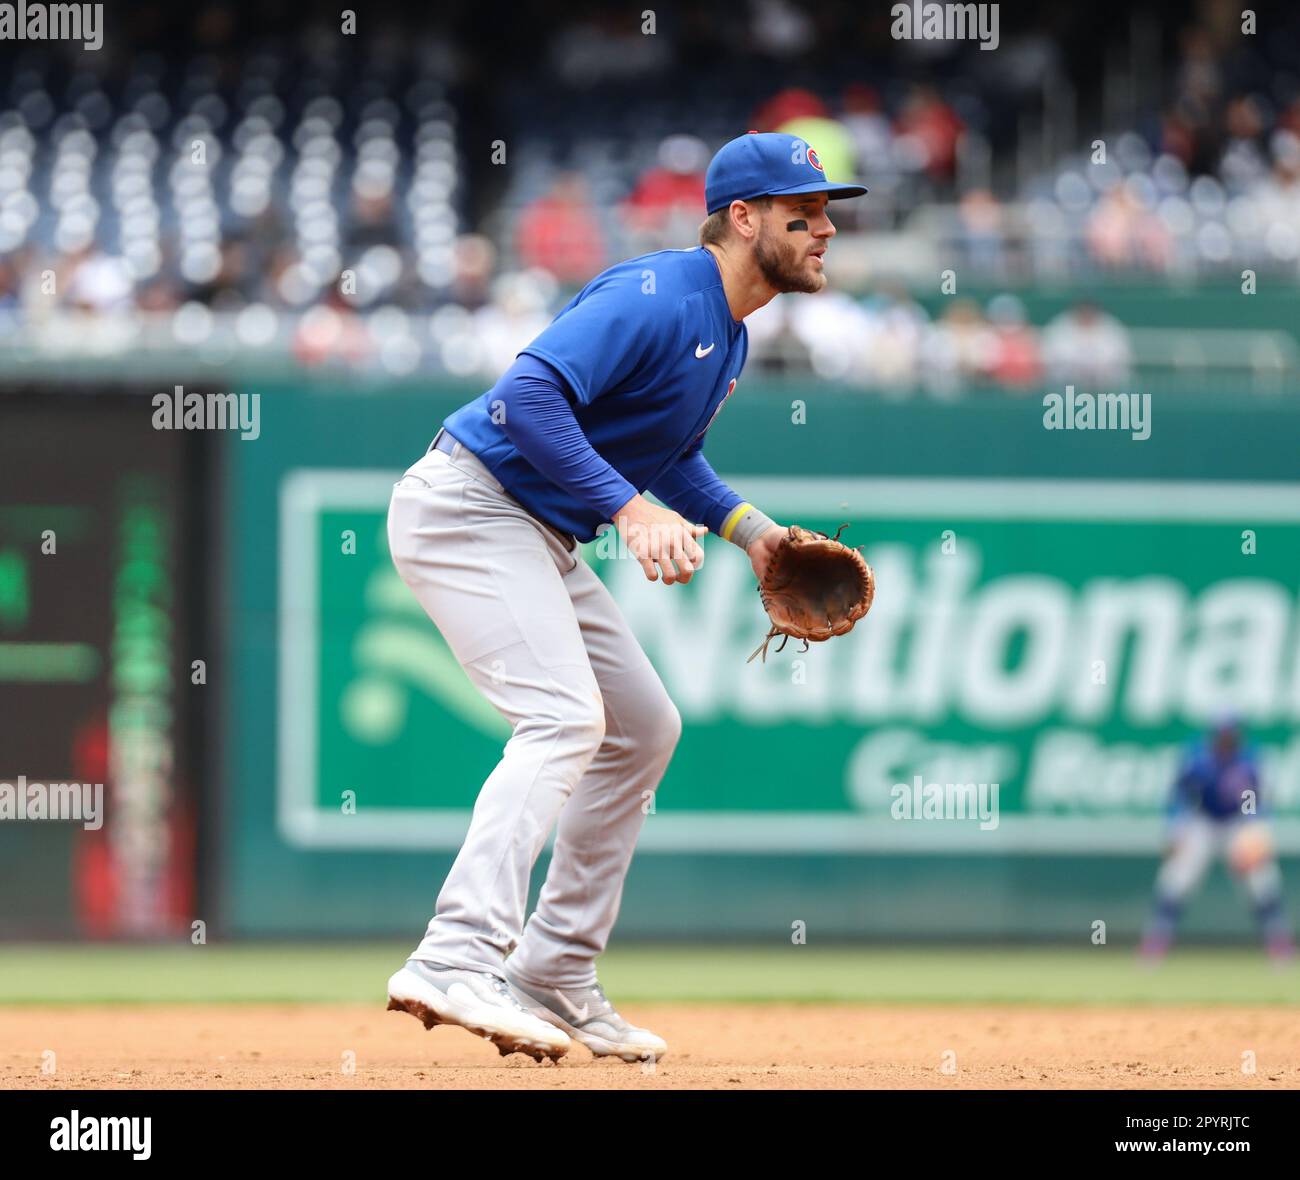 Washington Dc, United States. 04th May, 2023. Chicago Cubs third baseman Patrick  Wisdom (16) in the fielding position at third base at the Washington  Nationals vs Chicago Cubs game at Nationals Park